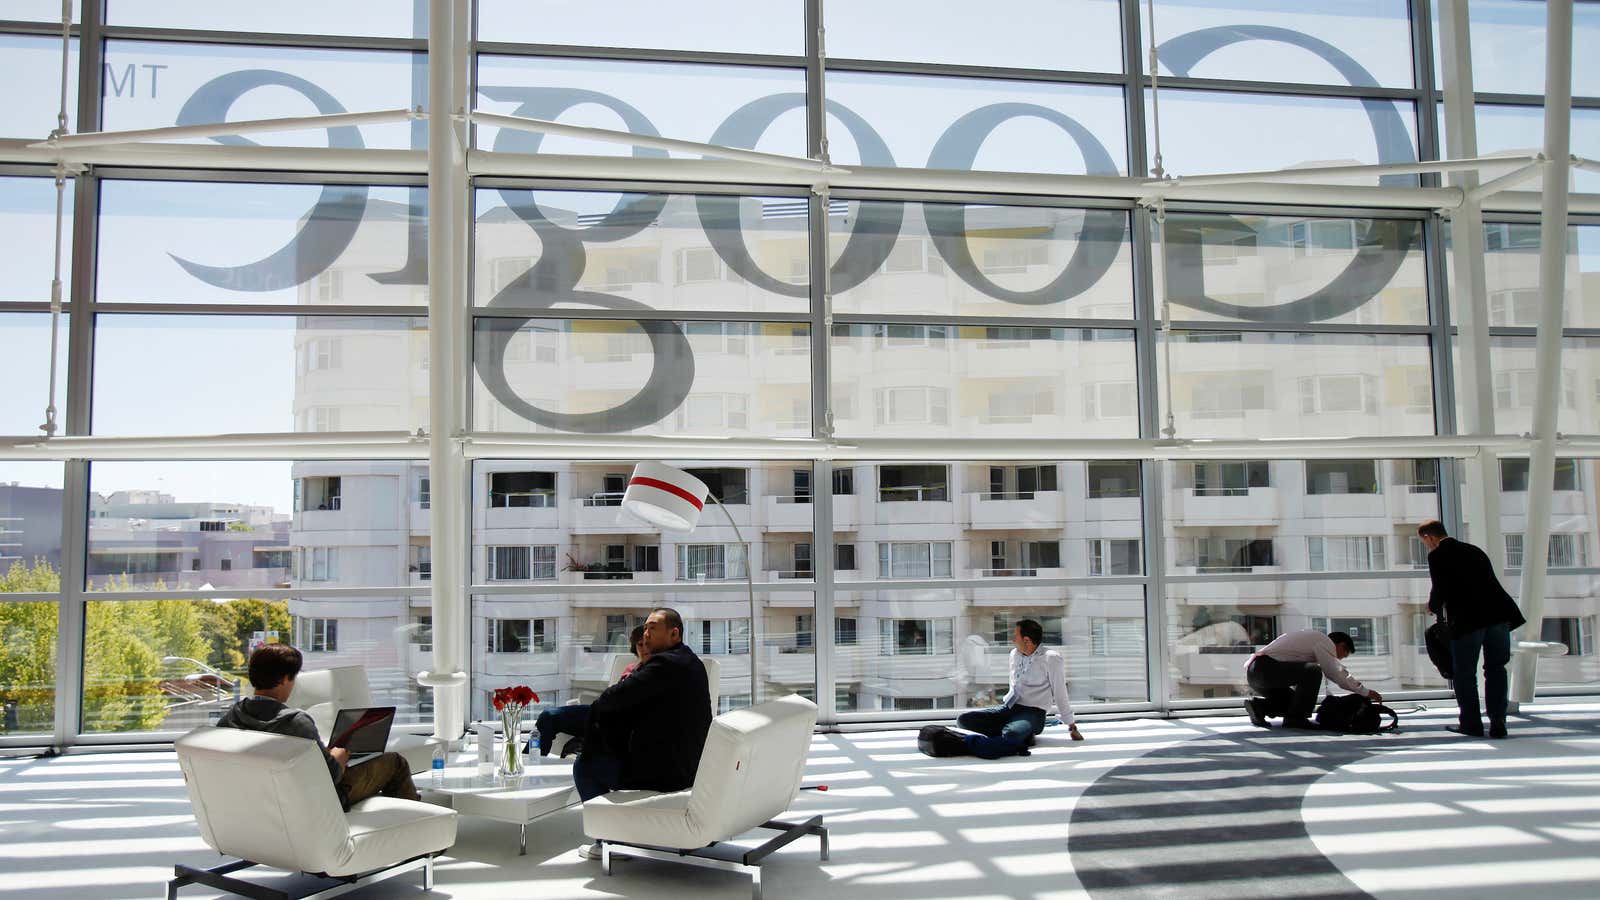 Attendees sits in front of a Google logo during Google I/O Conference at Moscone Center in San Francisco, California June 28, 2012.